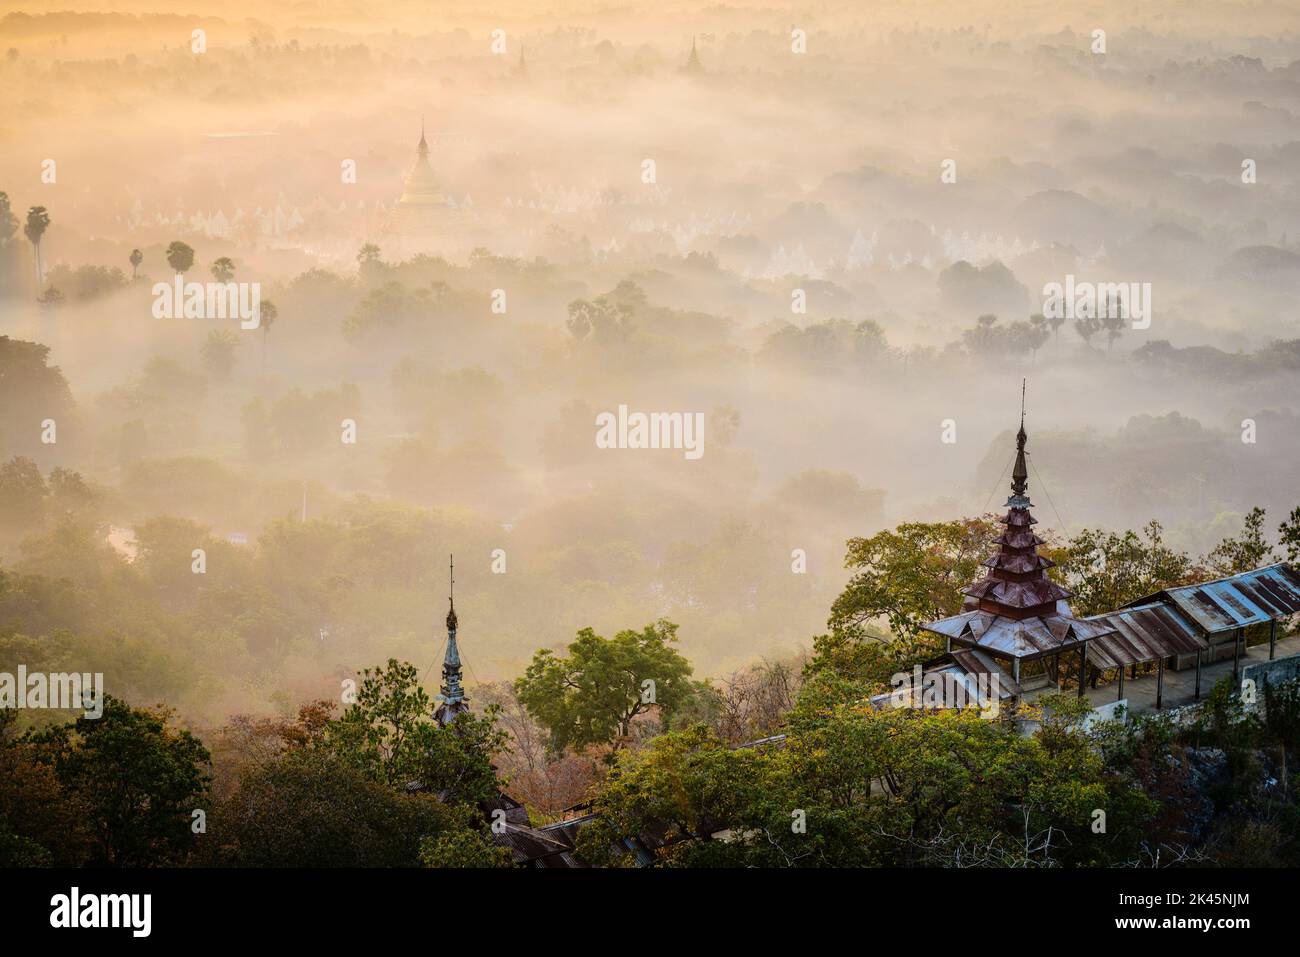 The view over the plain of temples, stupas rising from the mist, lakes and woodland. Stock Photo